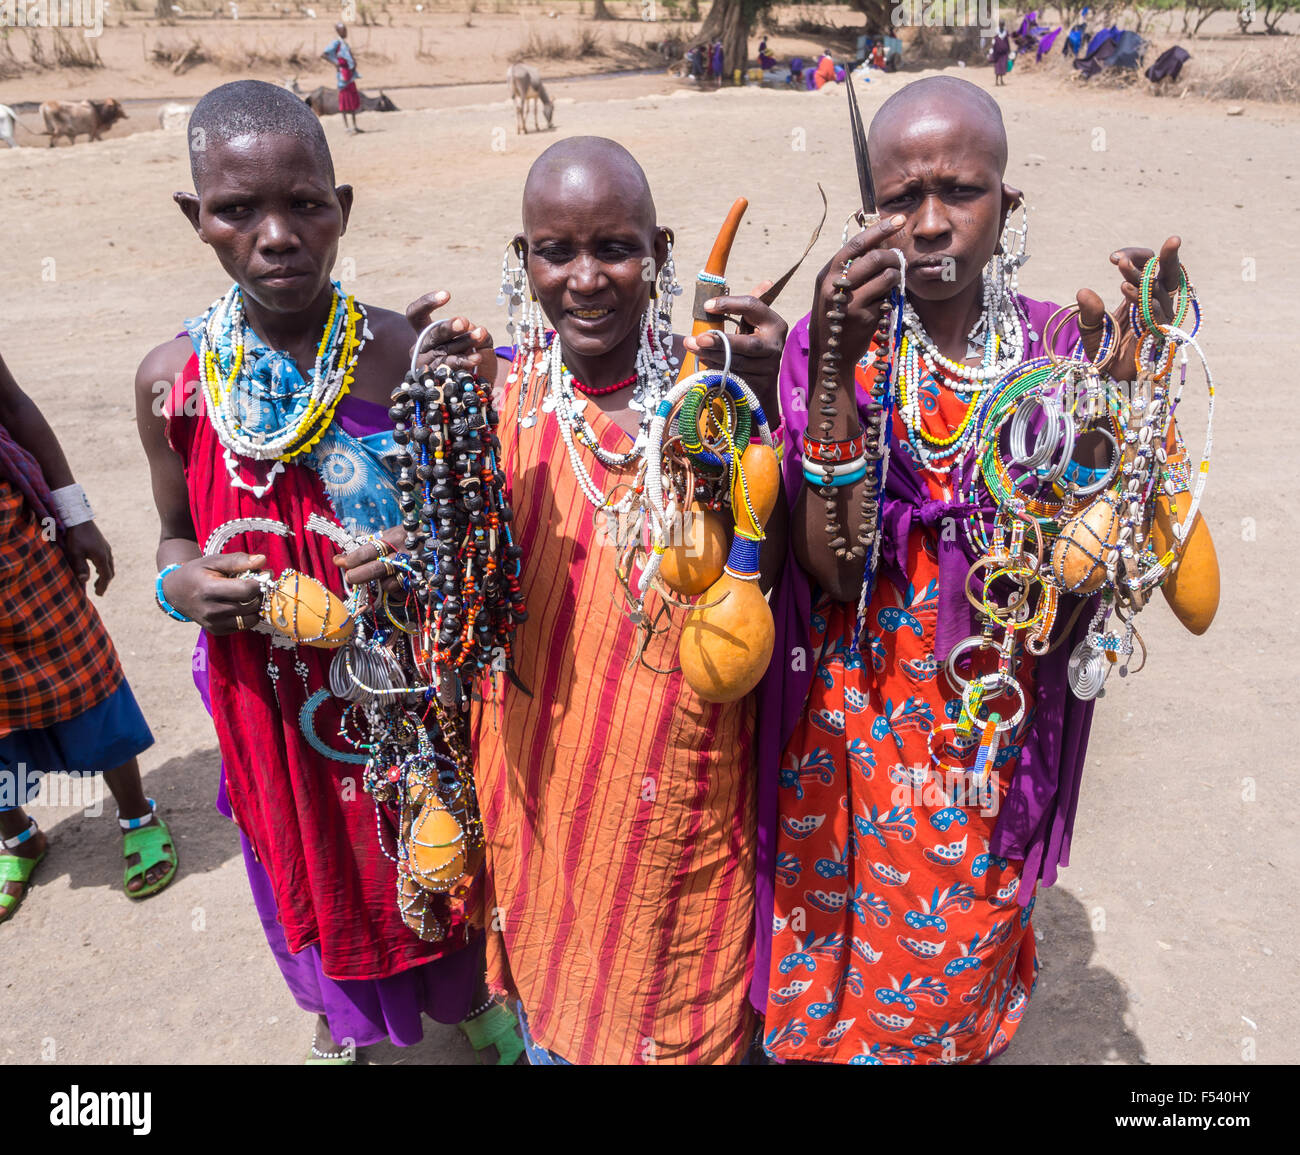 Maasai women offering souvenirs (mainly traditional jewelry) to the tourists in Arusha region, Tanzania, Africa. Stock Photo